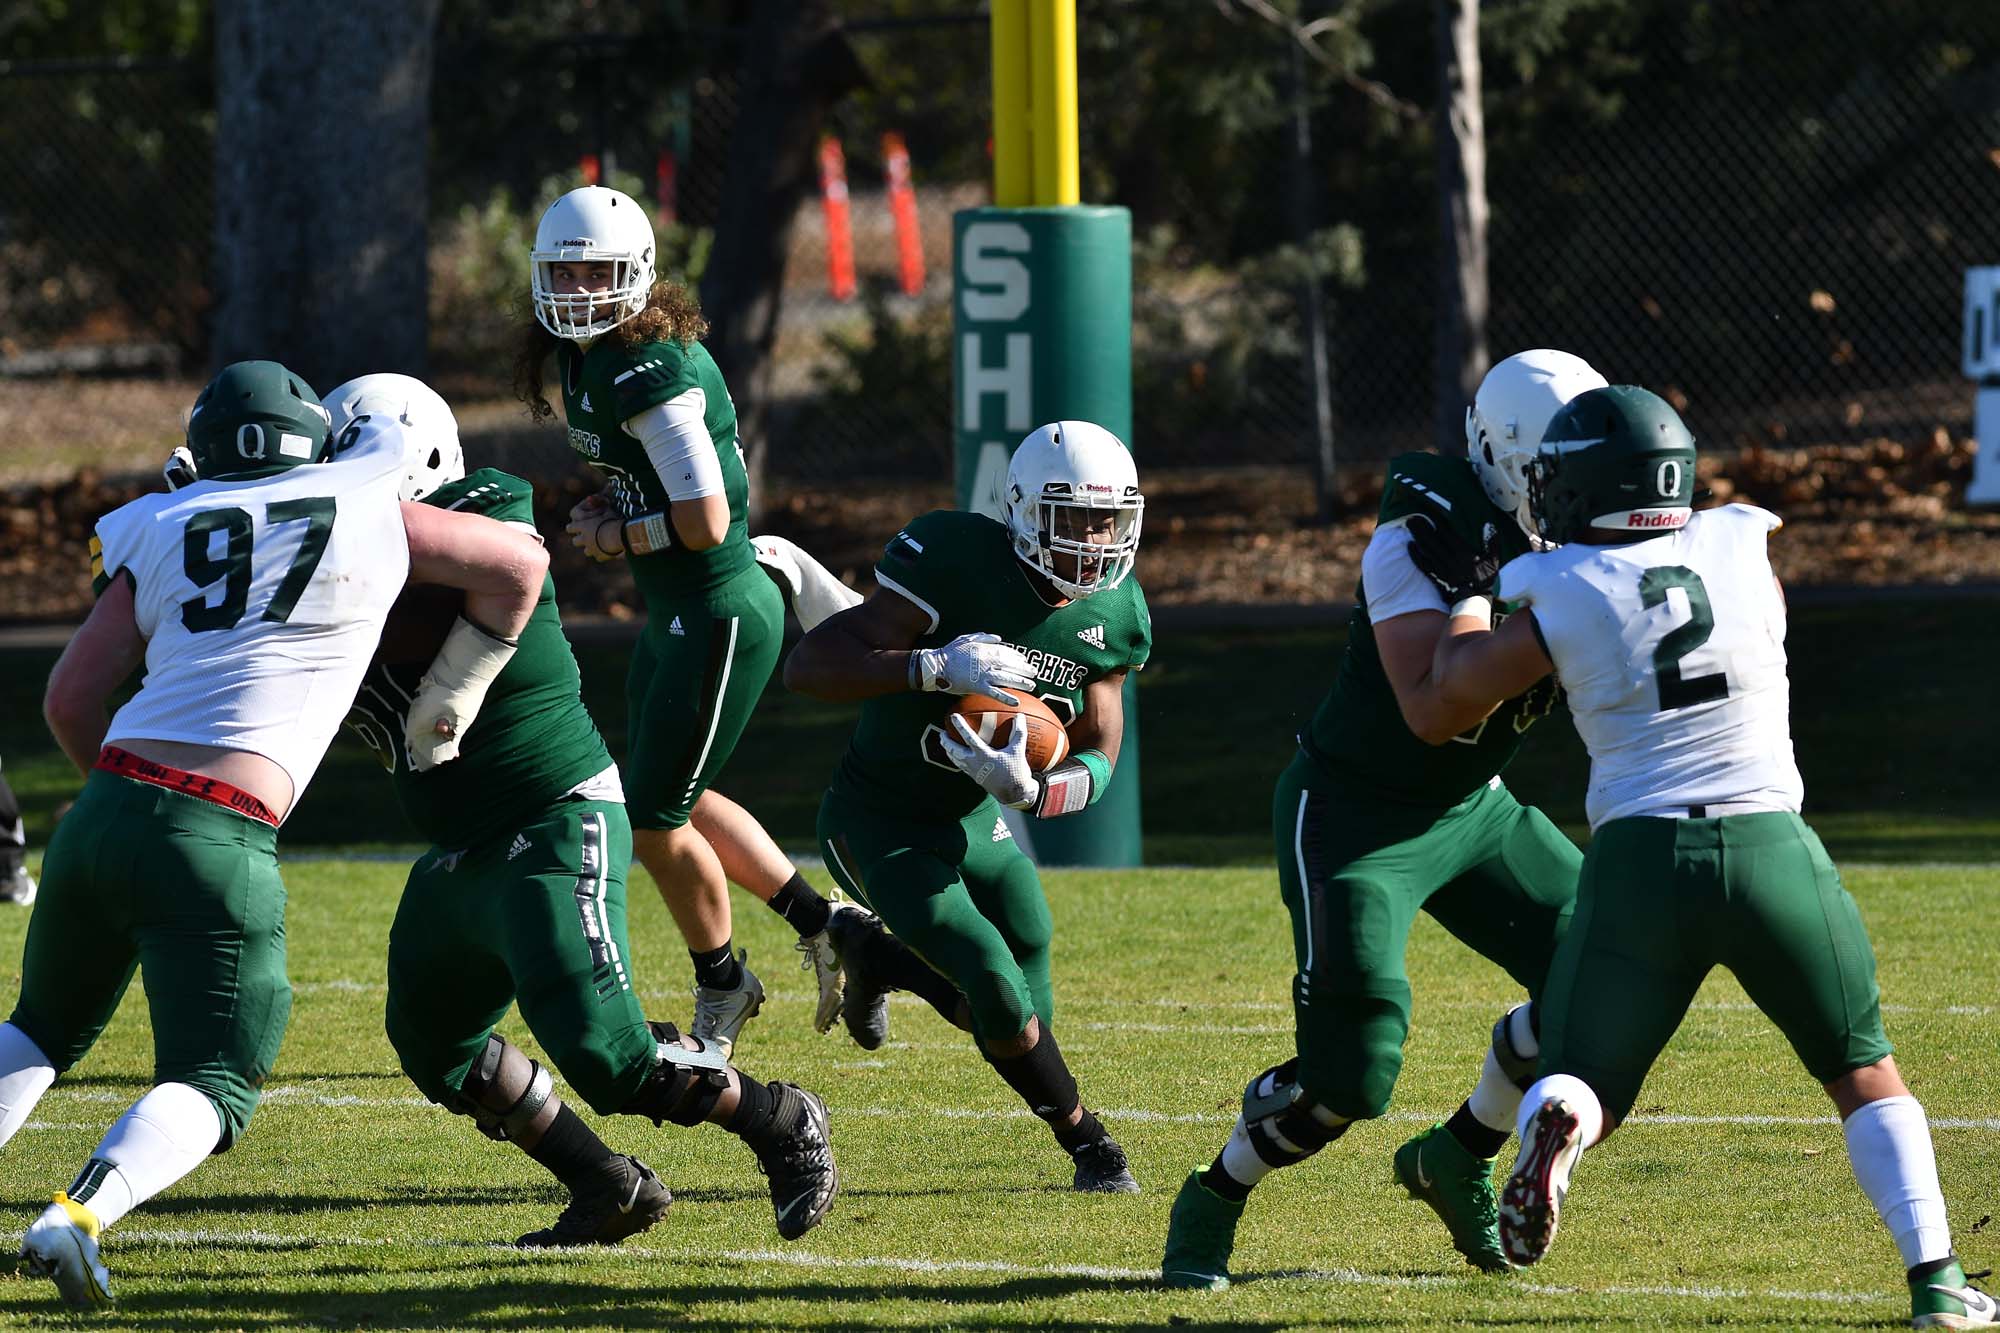 BOSTON HAS BIG DAY TO LEAD SHASTA PAST FEATHER RIVER 31-21